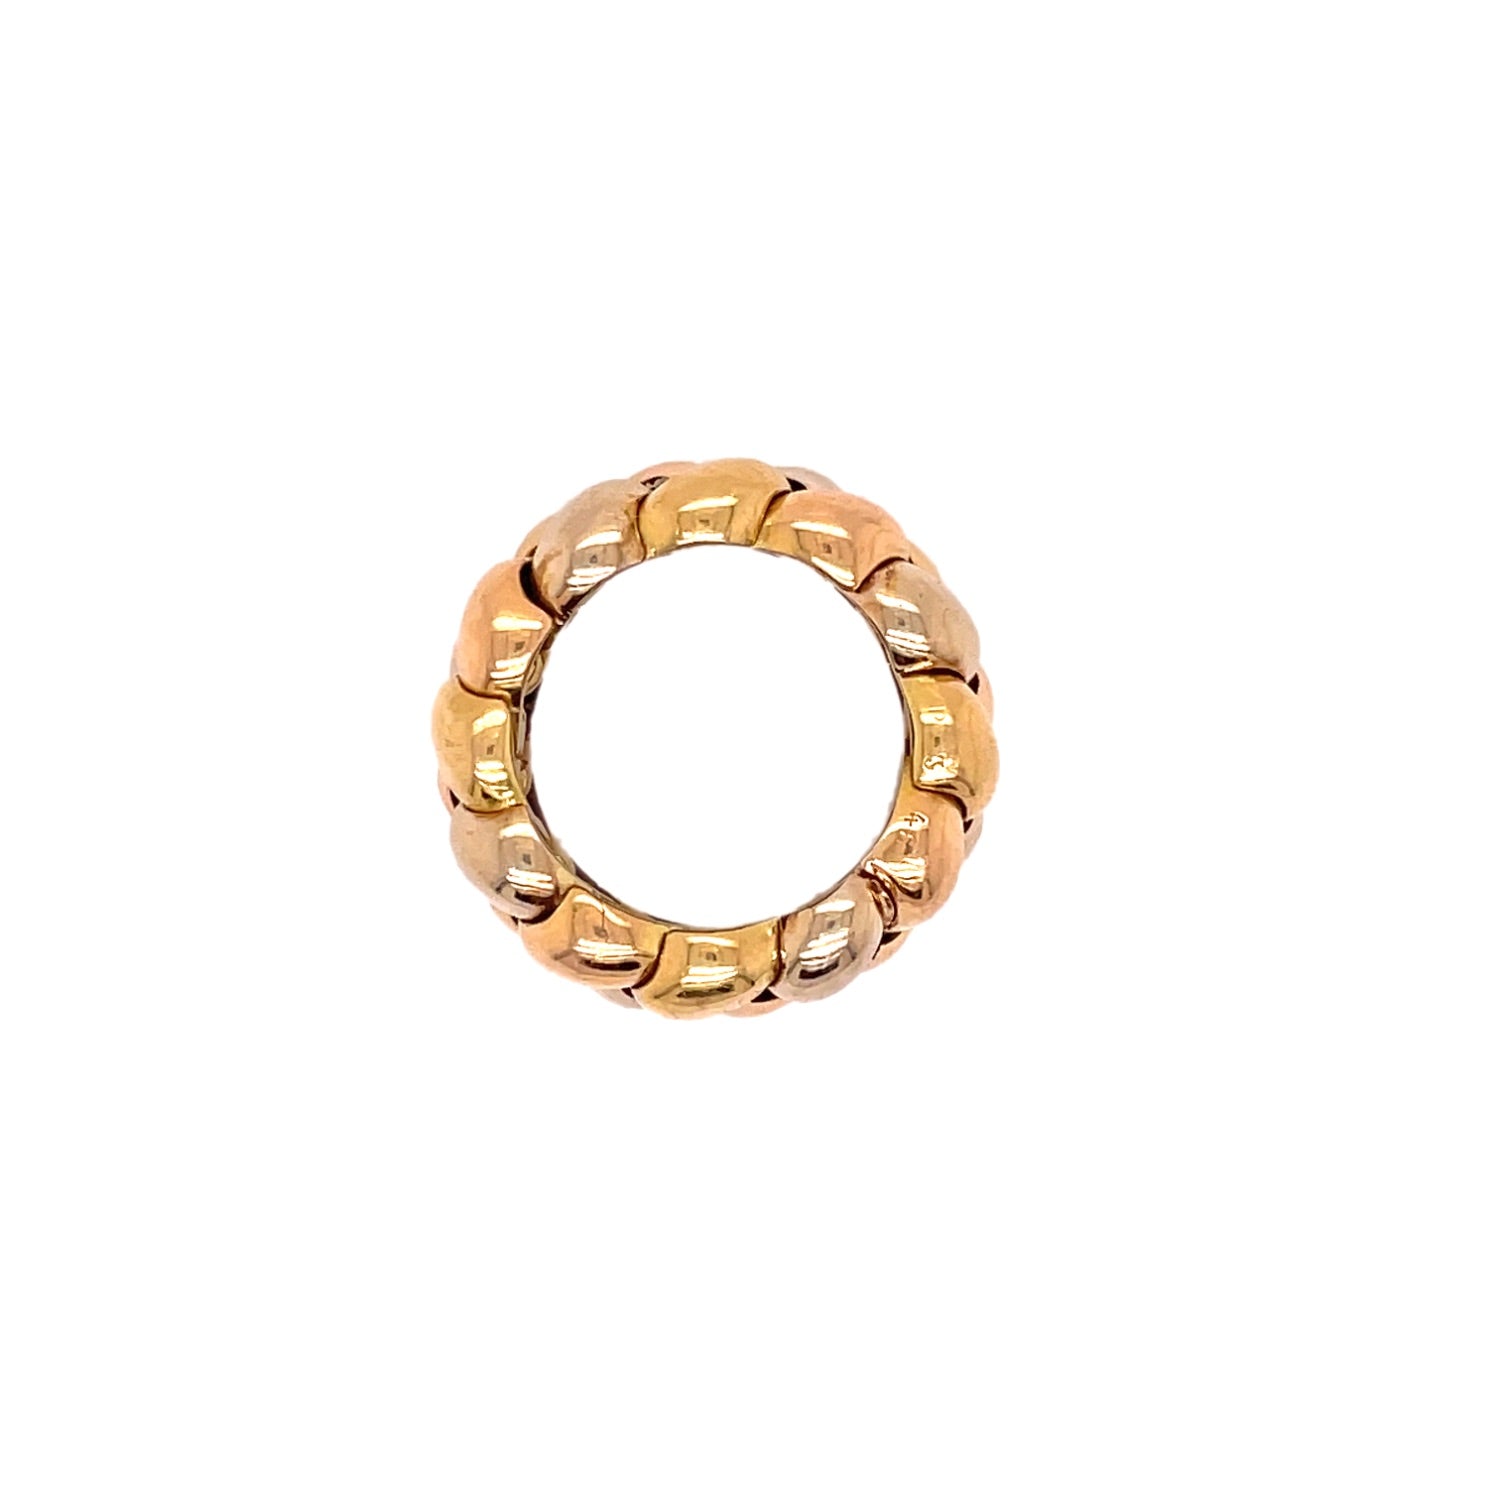 Close-up photograph of a gold ring featuring uniform shaped segments.